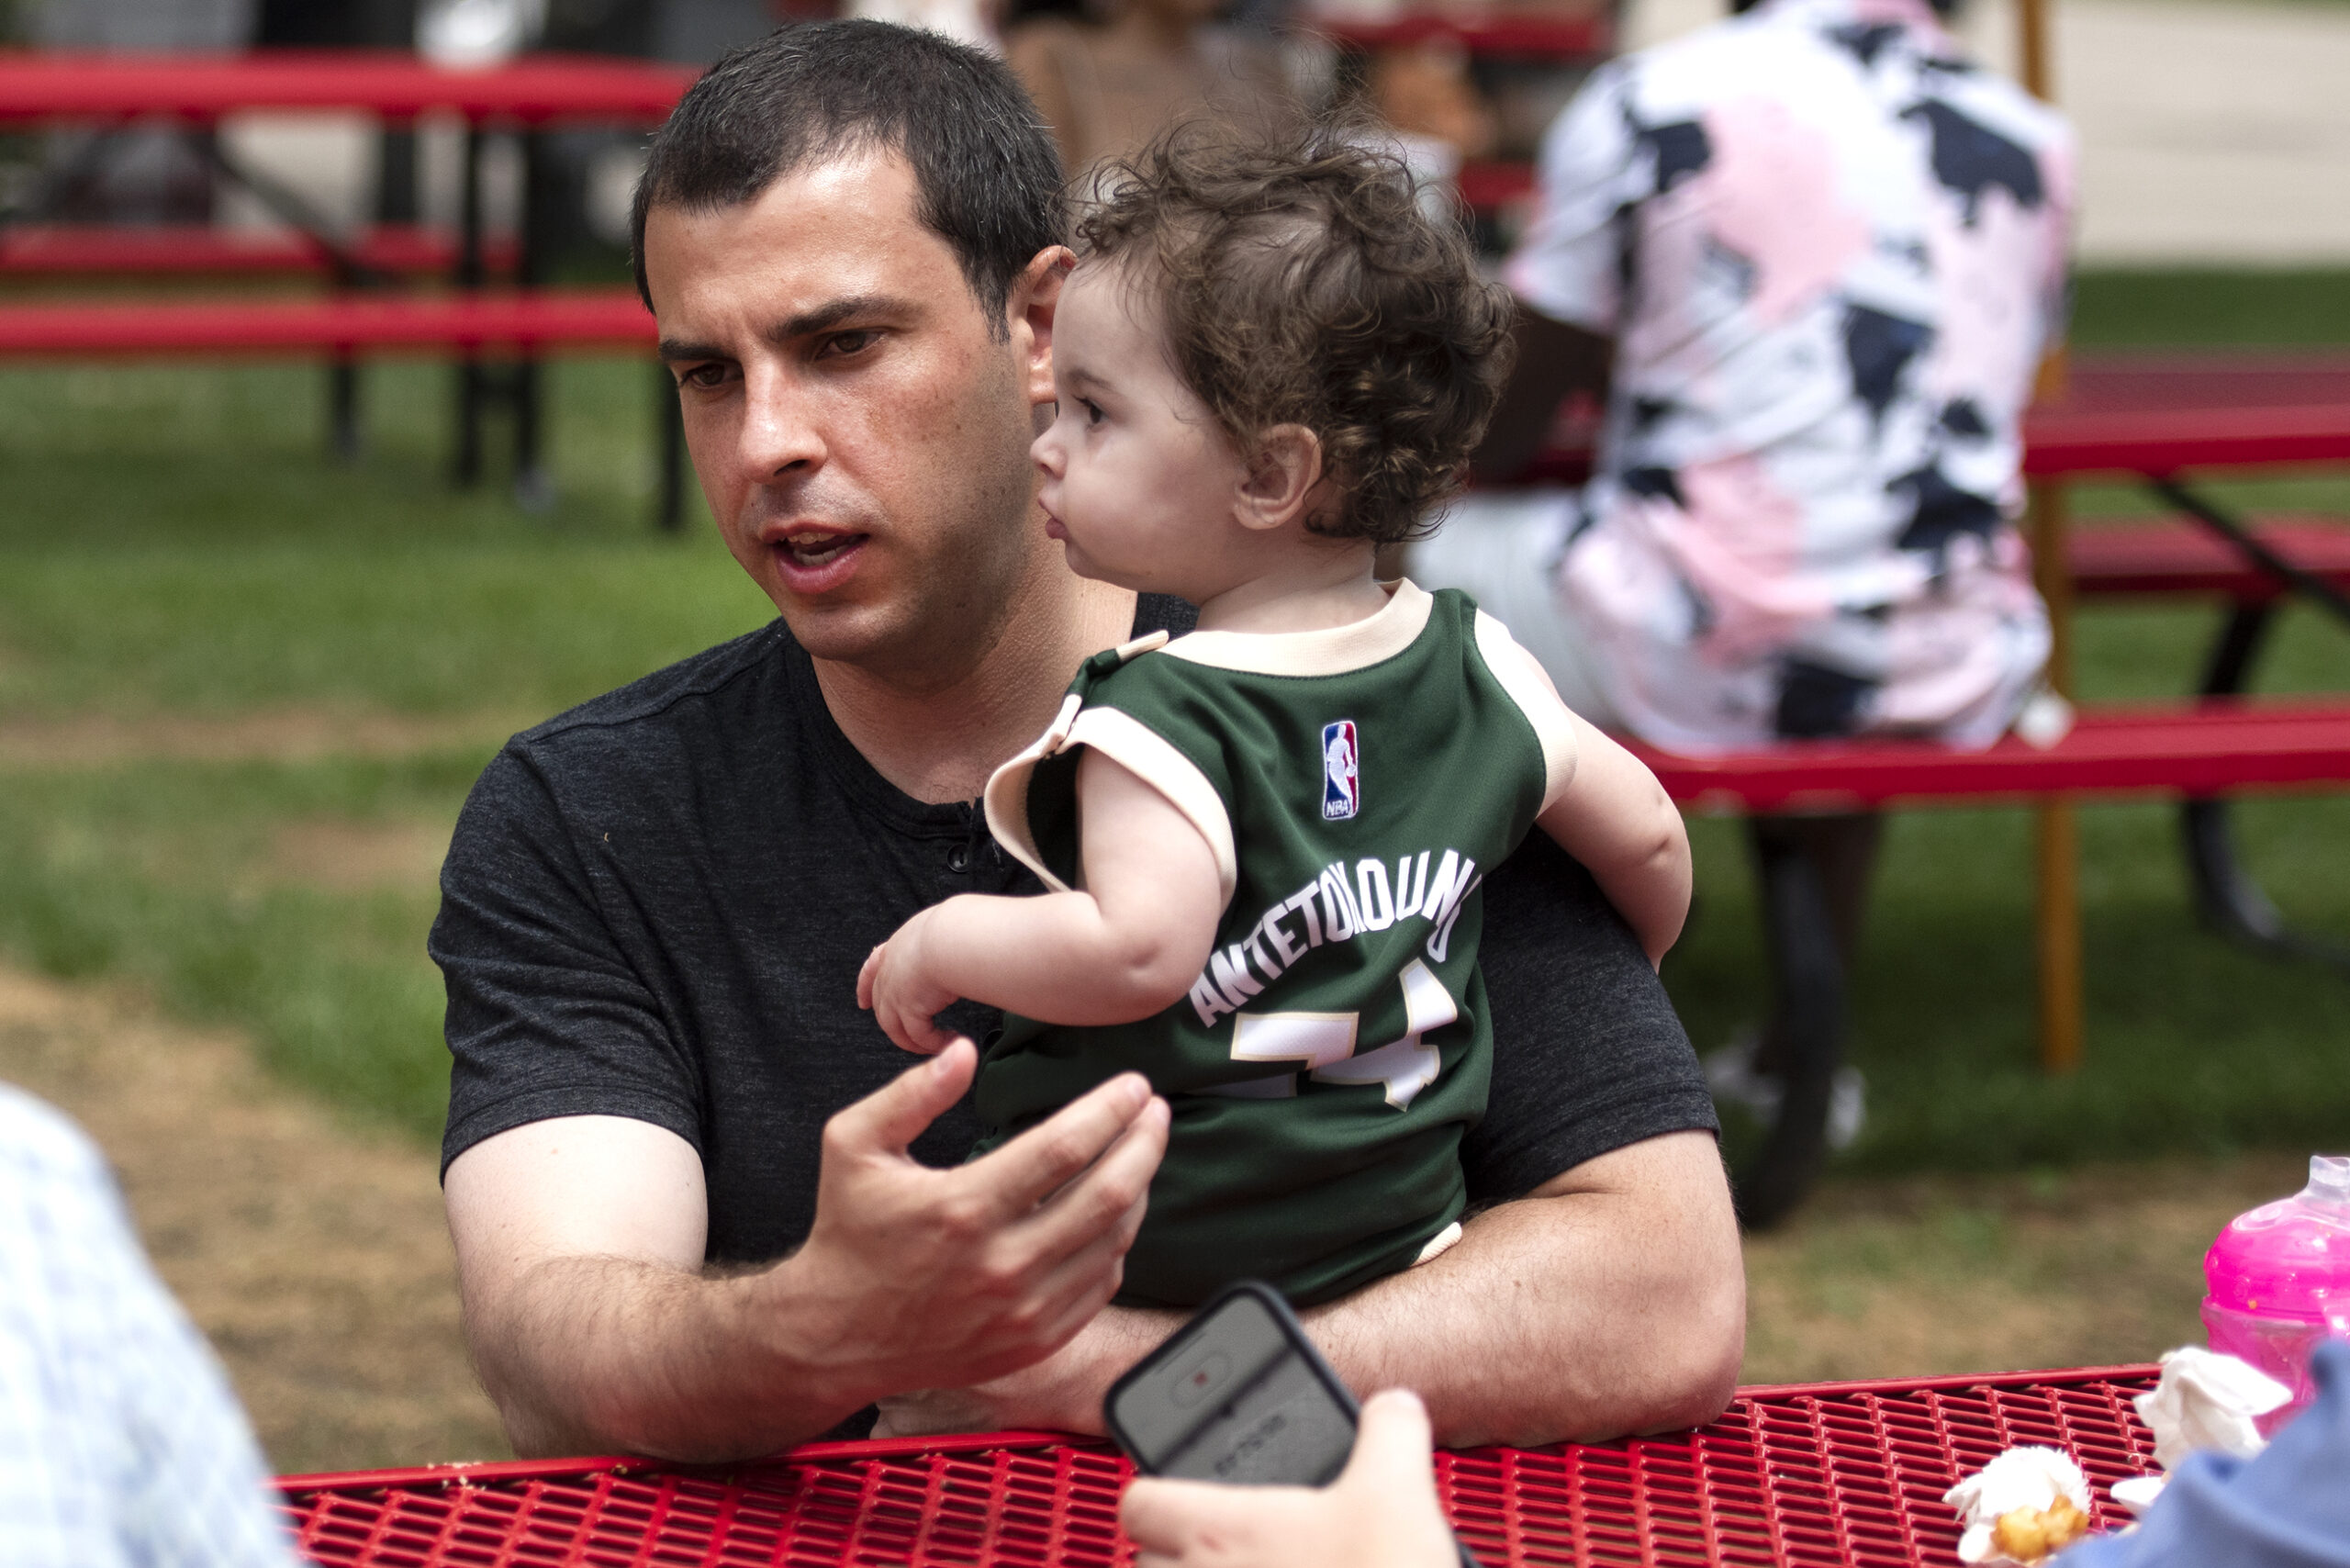 Alex Lasry sits at a picnic table as he holds his young daughter.